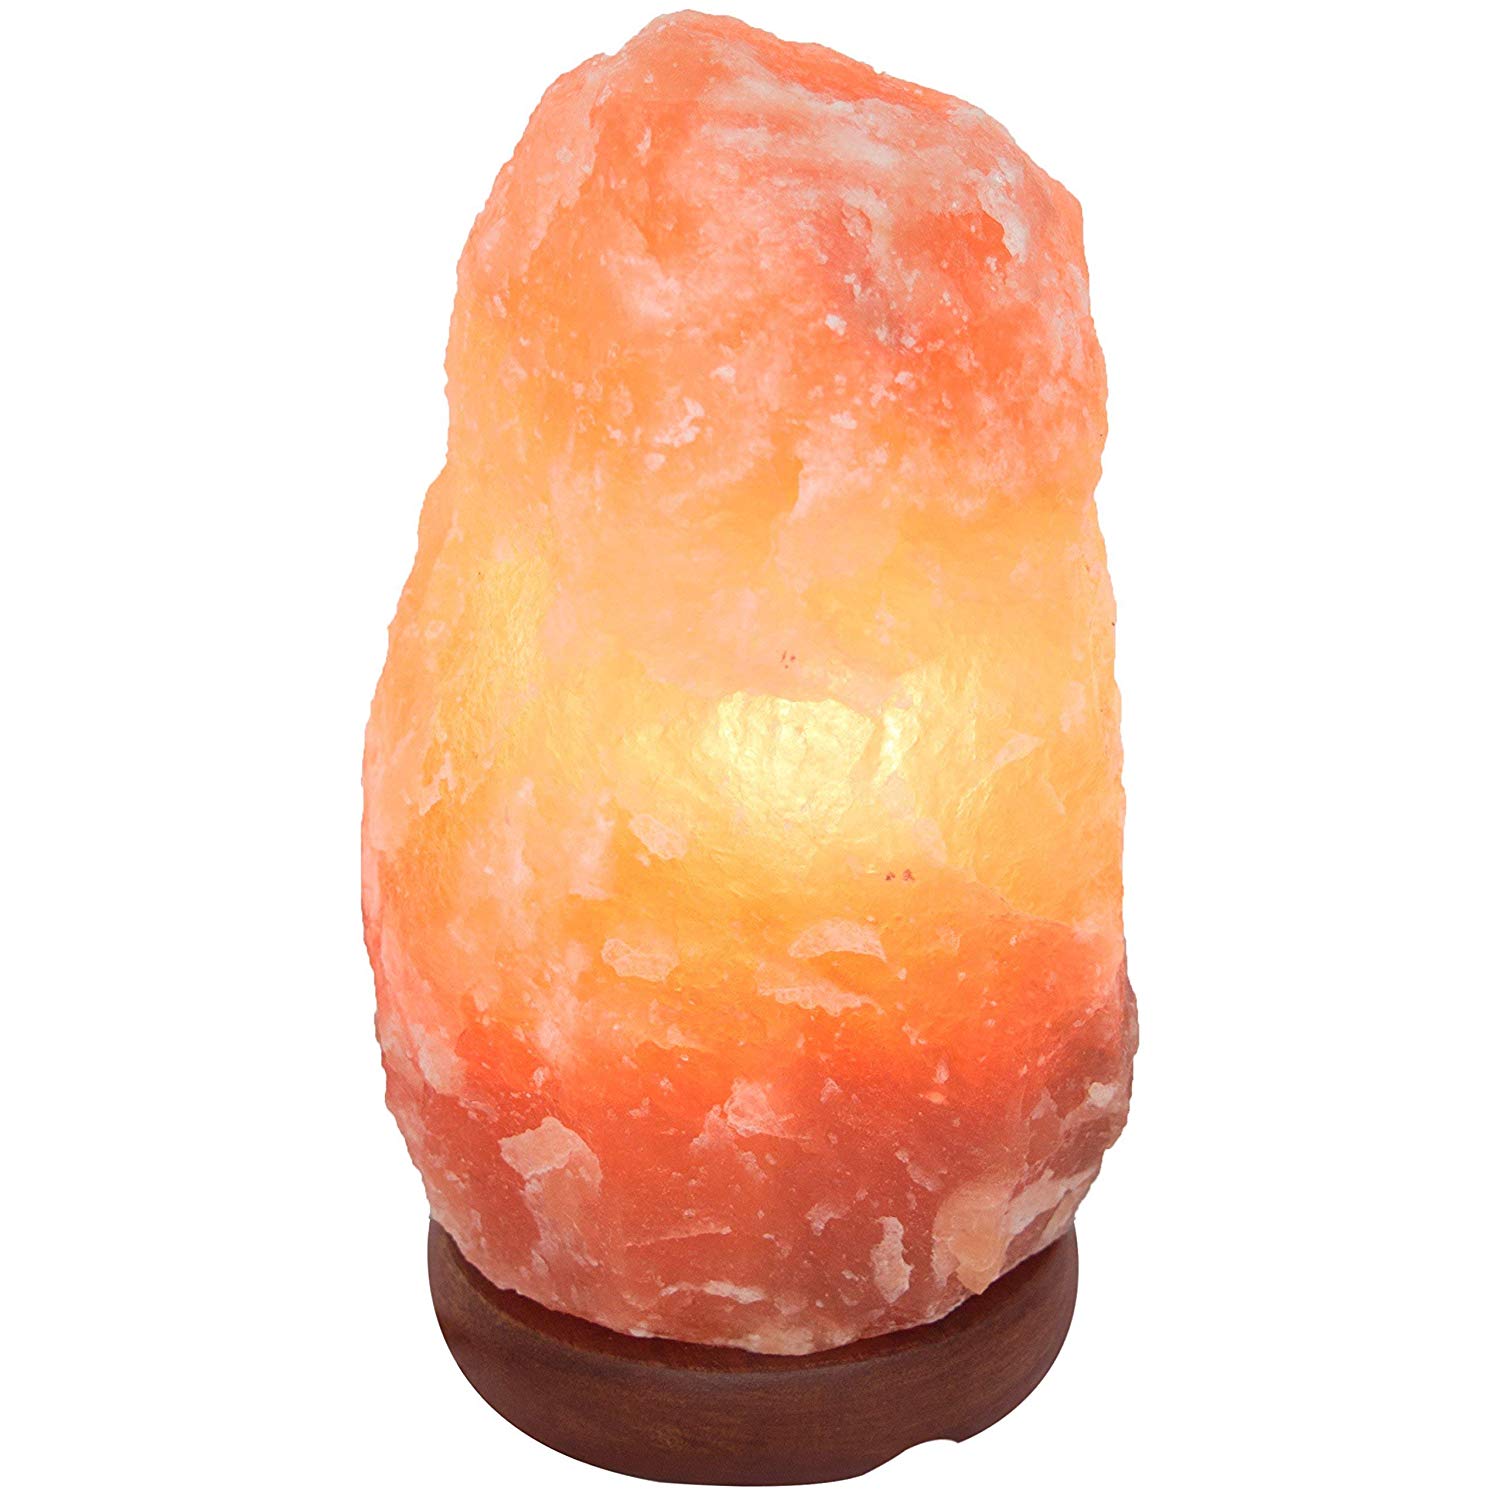 Keraiz Highest Quality Himalayan Pink Rock Salt Lamp with Bulb and Cable 2-3KG/ Secure Wooden Base/Iodized Mineral Extracts/Natural Relaxing Lighting Home Decor. 